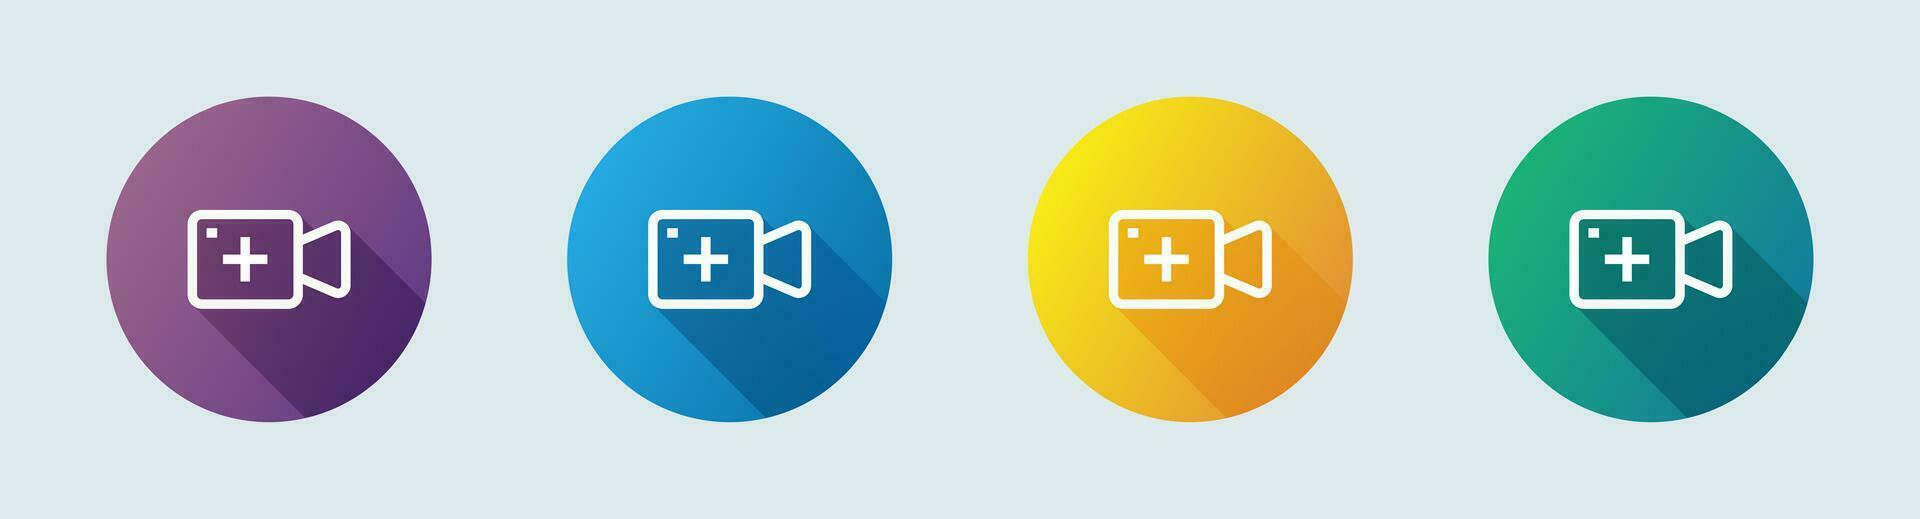 Upload video line icon in flat design style. Social media signs vector illustration.